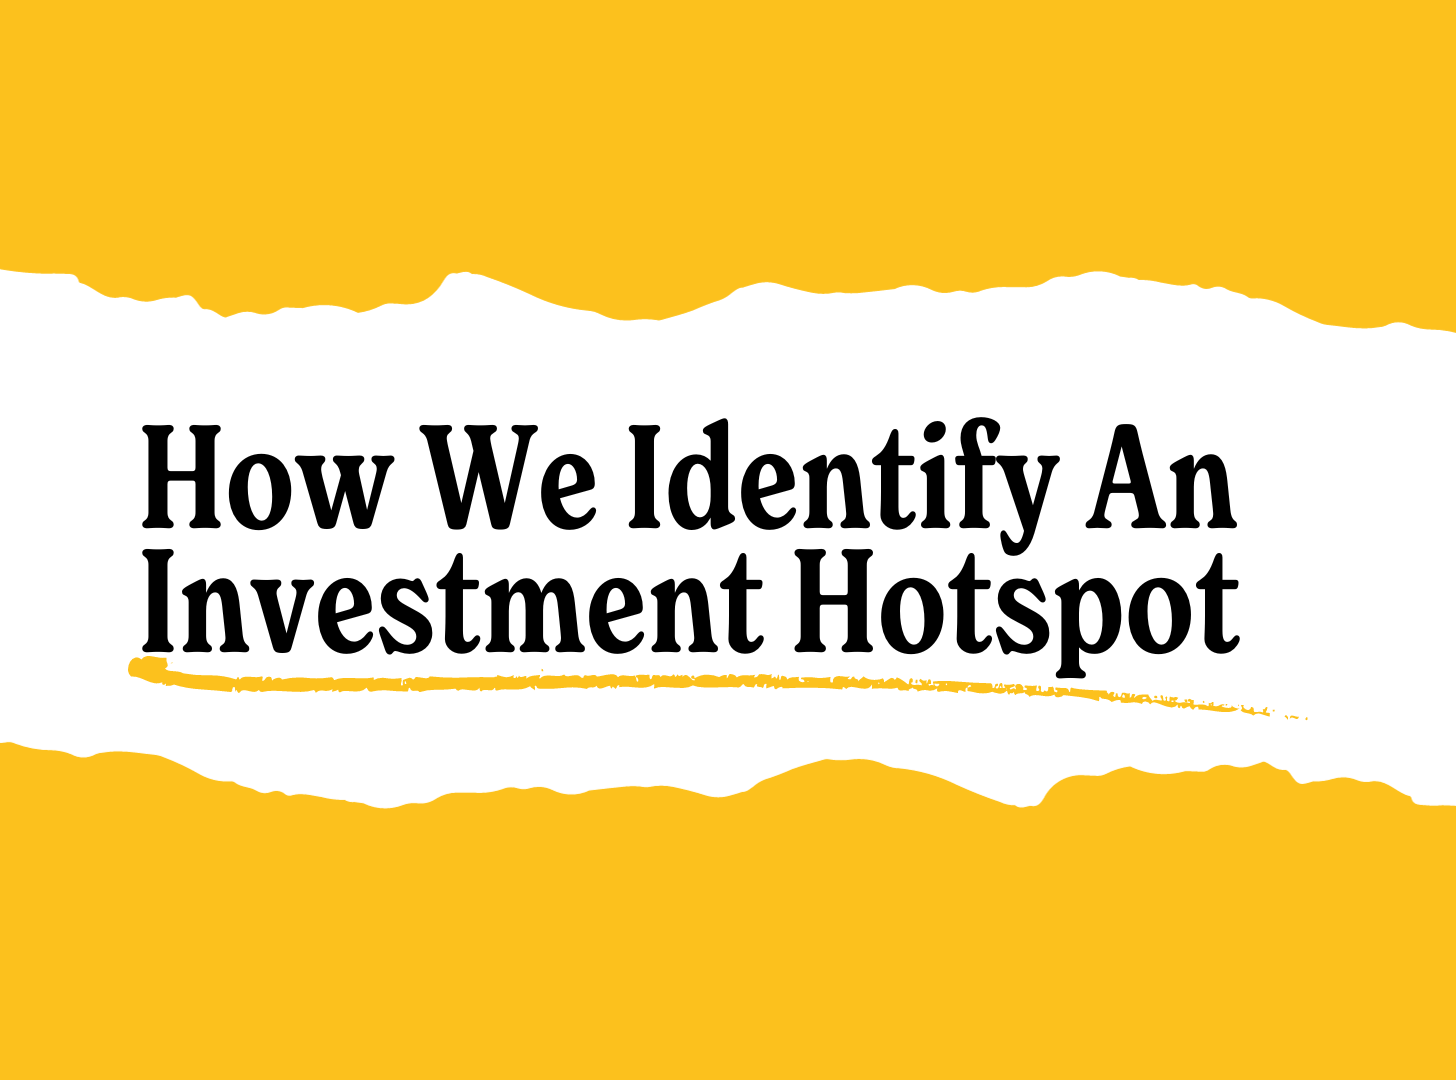 How We Identify An Investment Hotspot